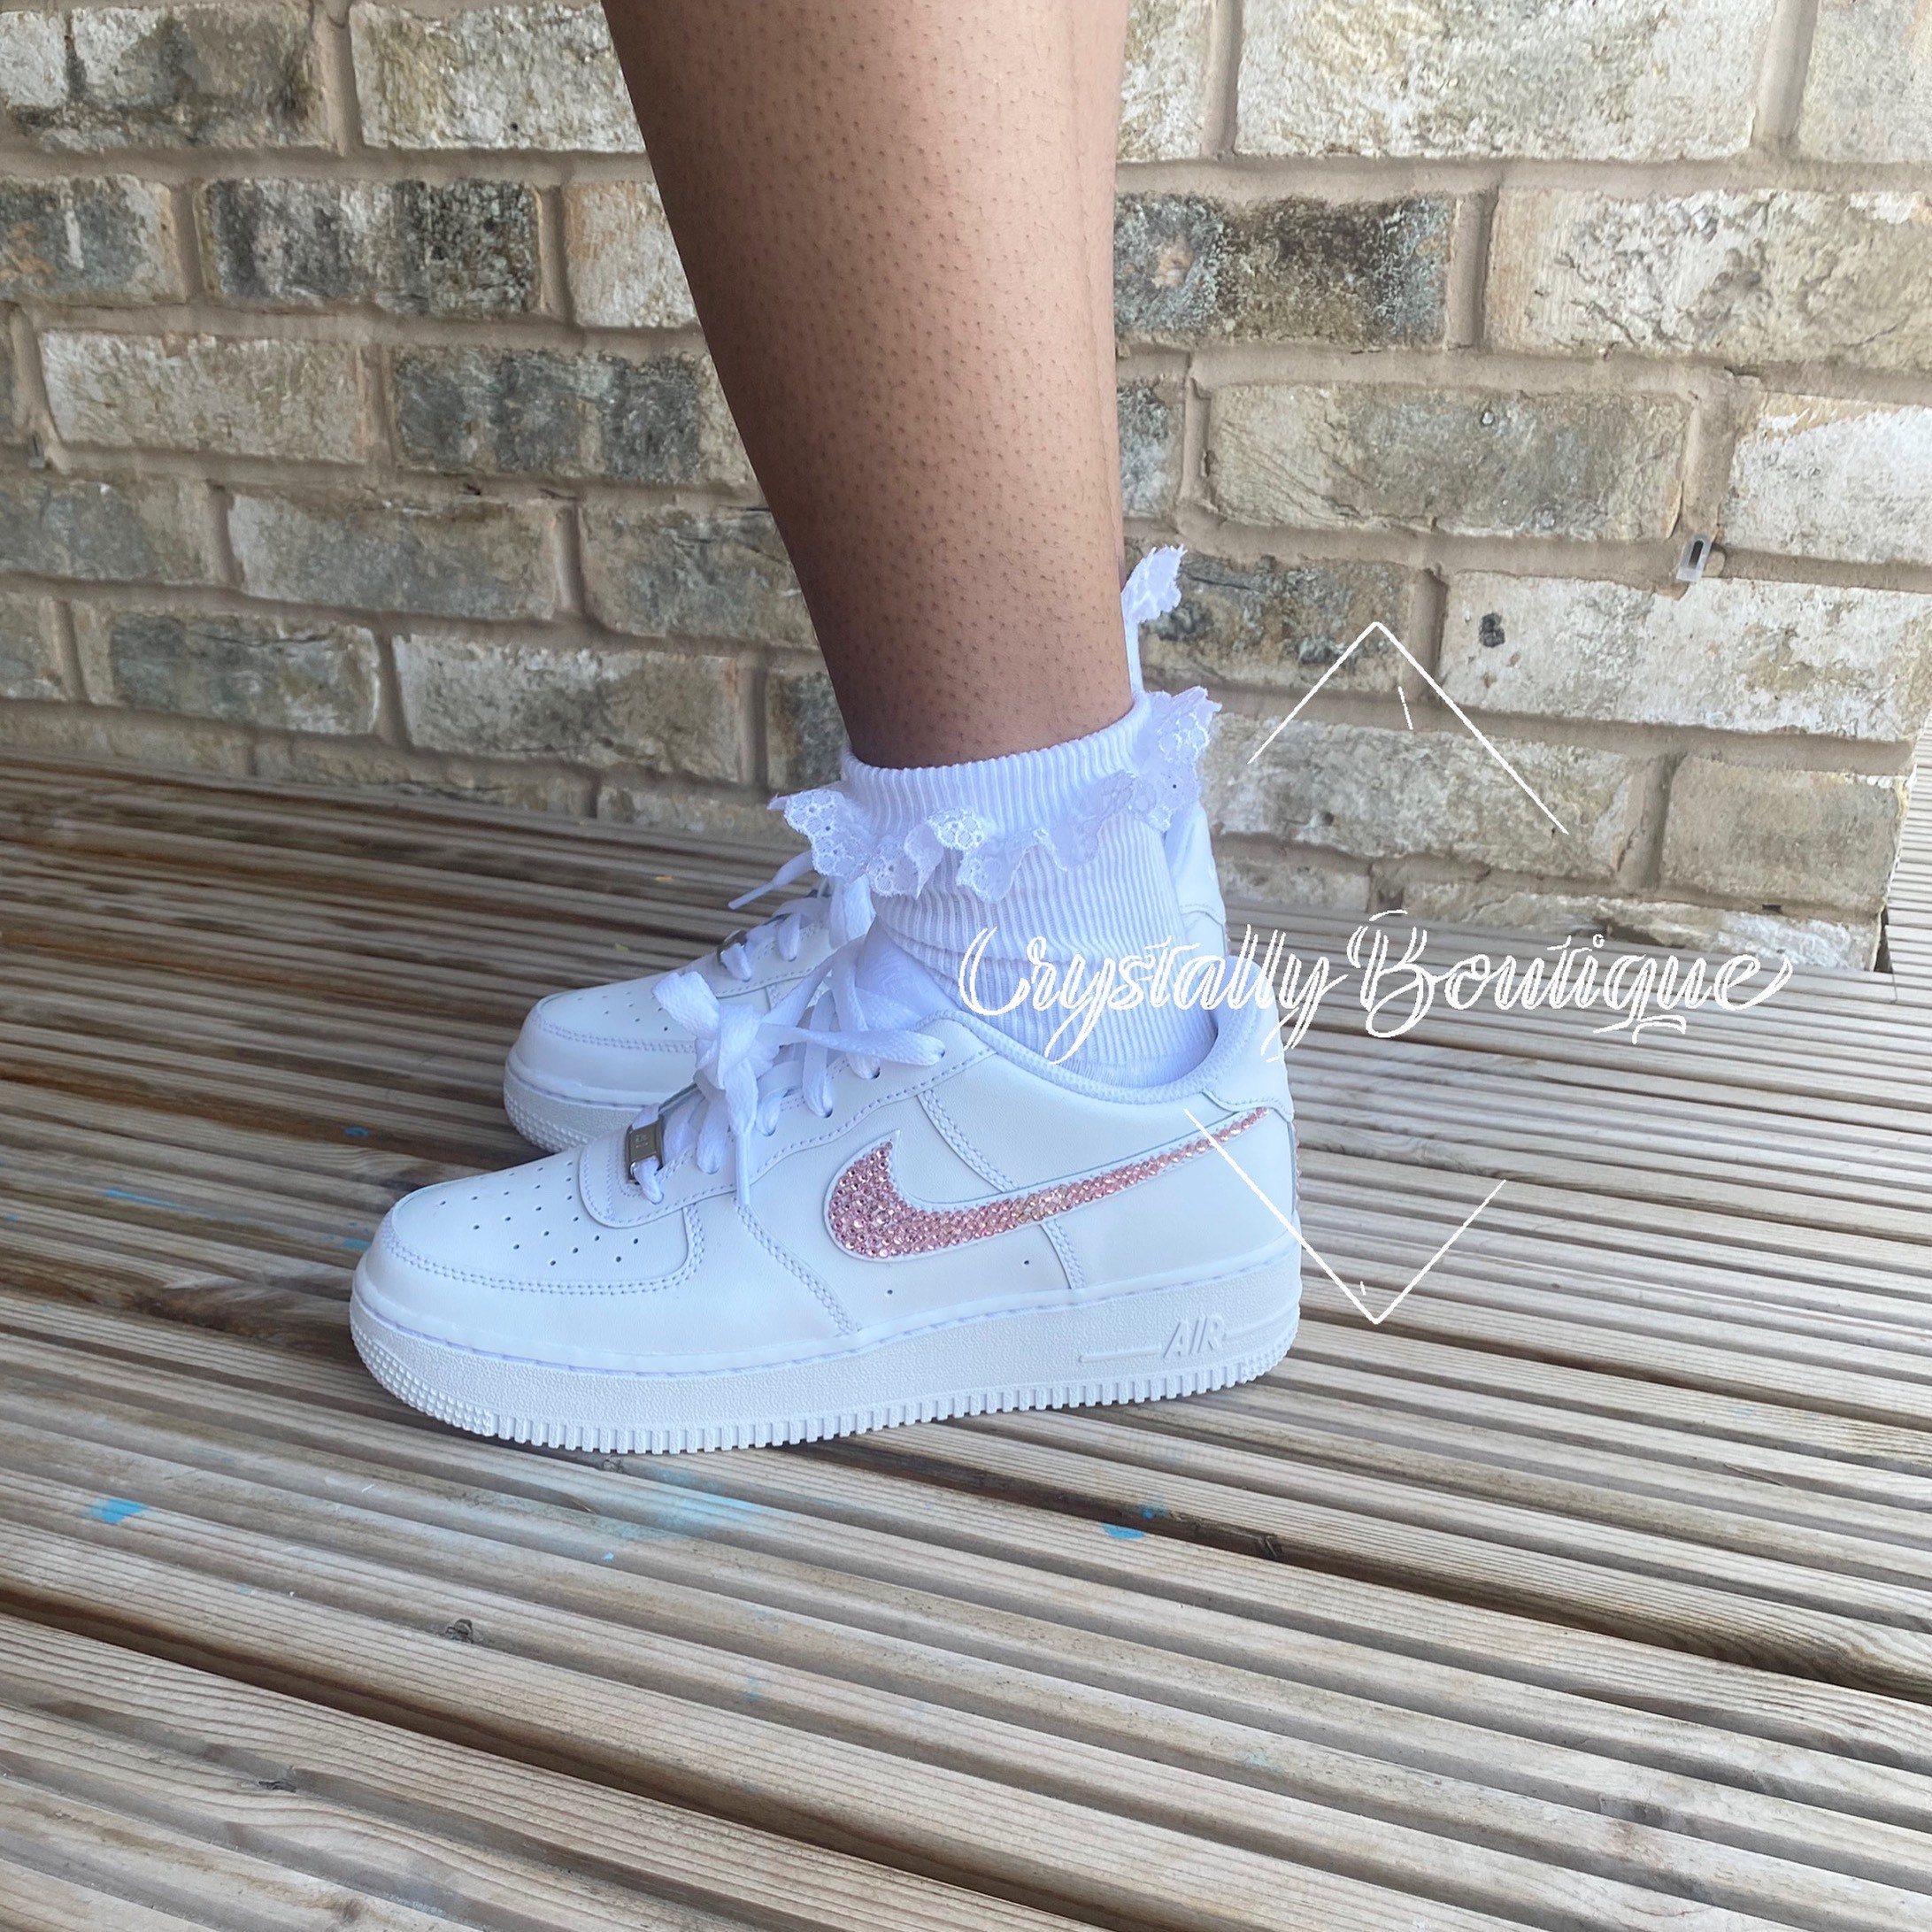 size 5.5 air force 1 white